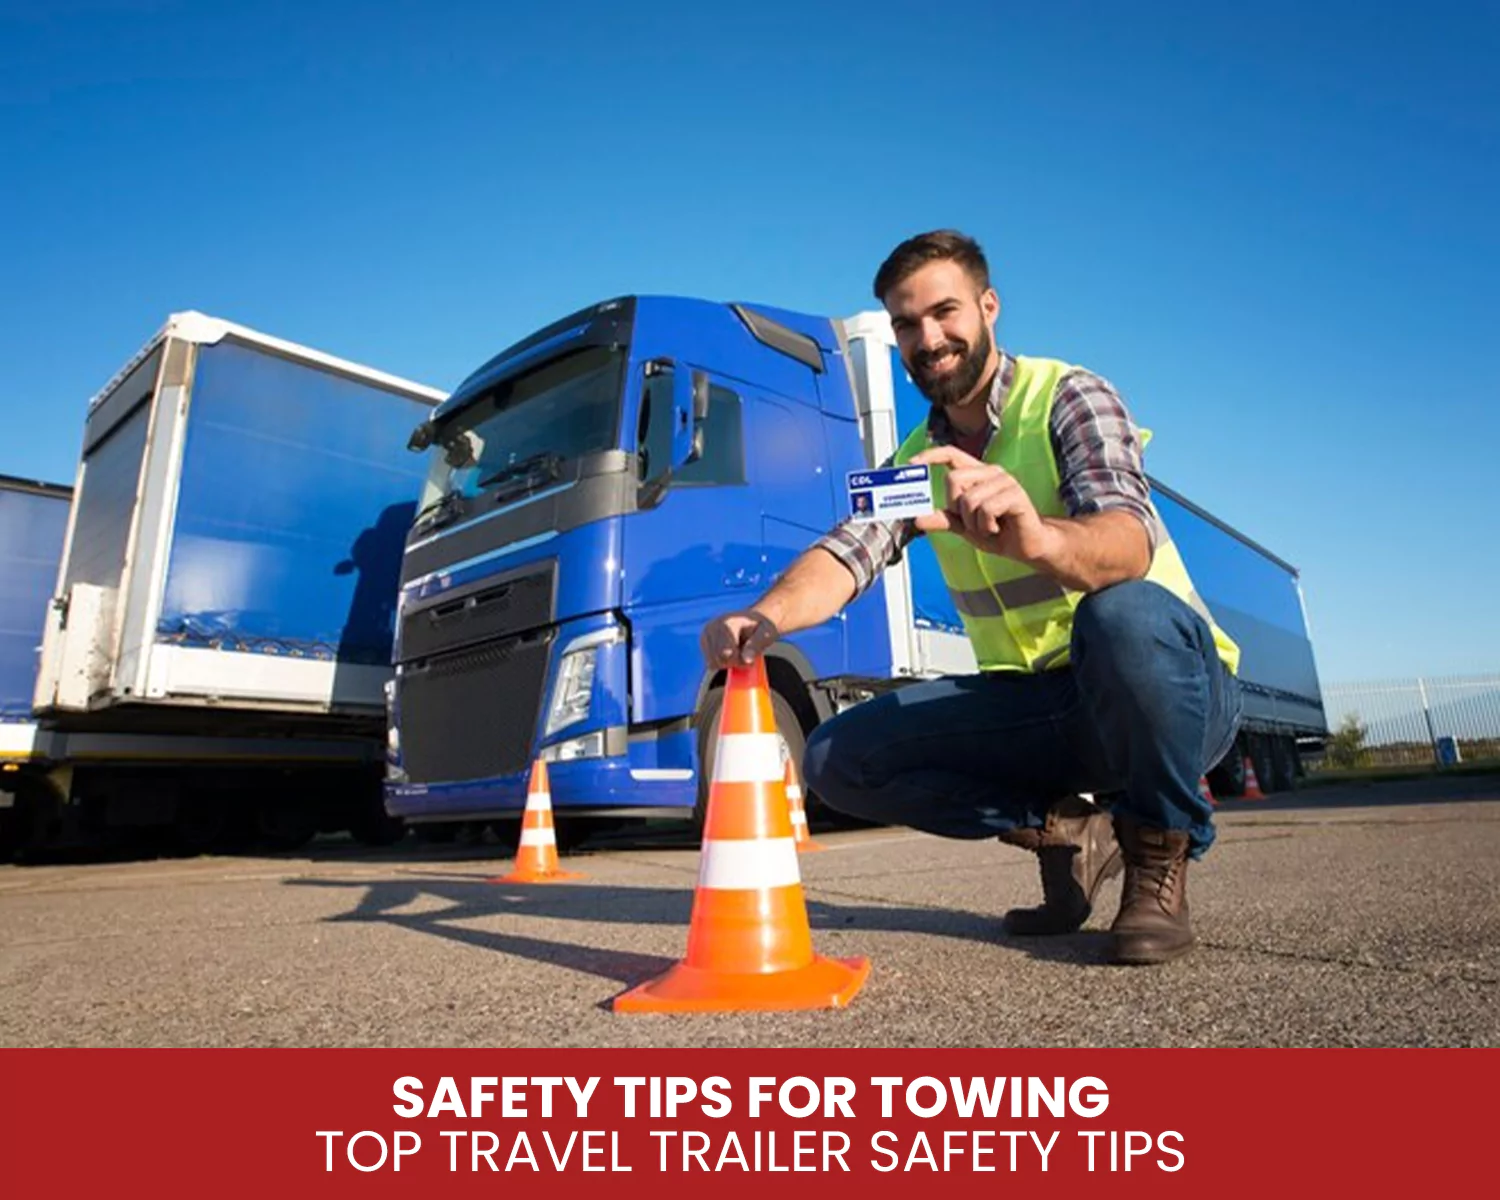 Why Travel Trailer Safety Tips Are Important?